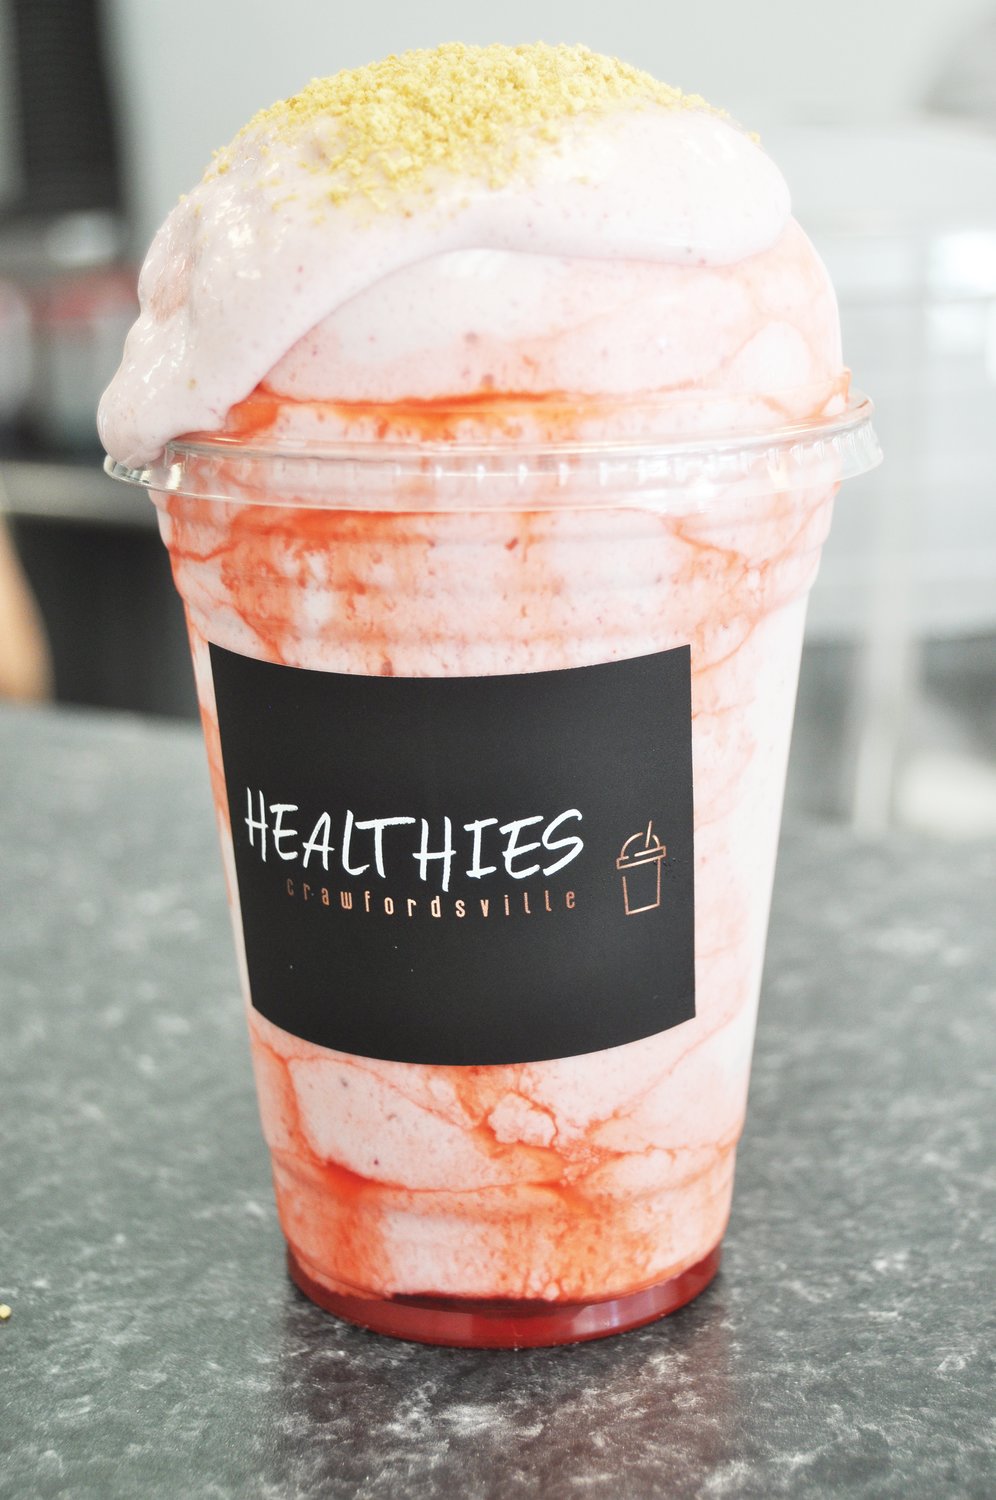 A strawberry cheesecake smoothie is on the menu at Healthies-Crawfordsville, which opened downtown earlier this month.